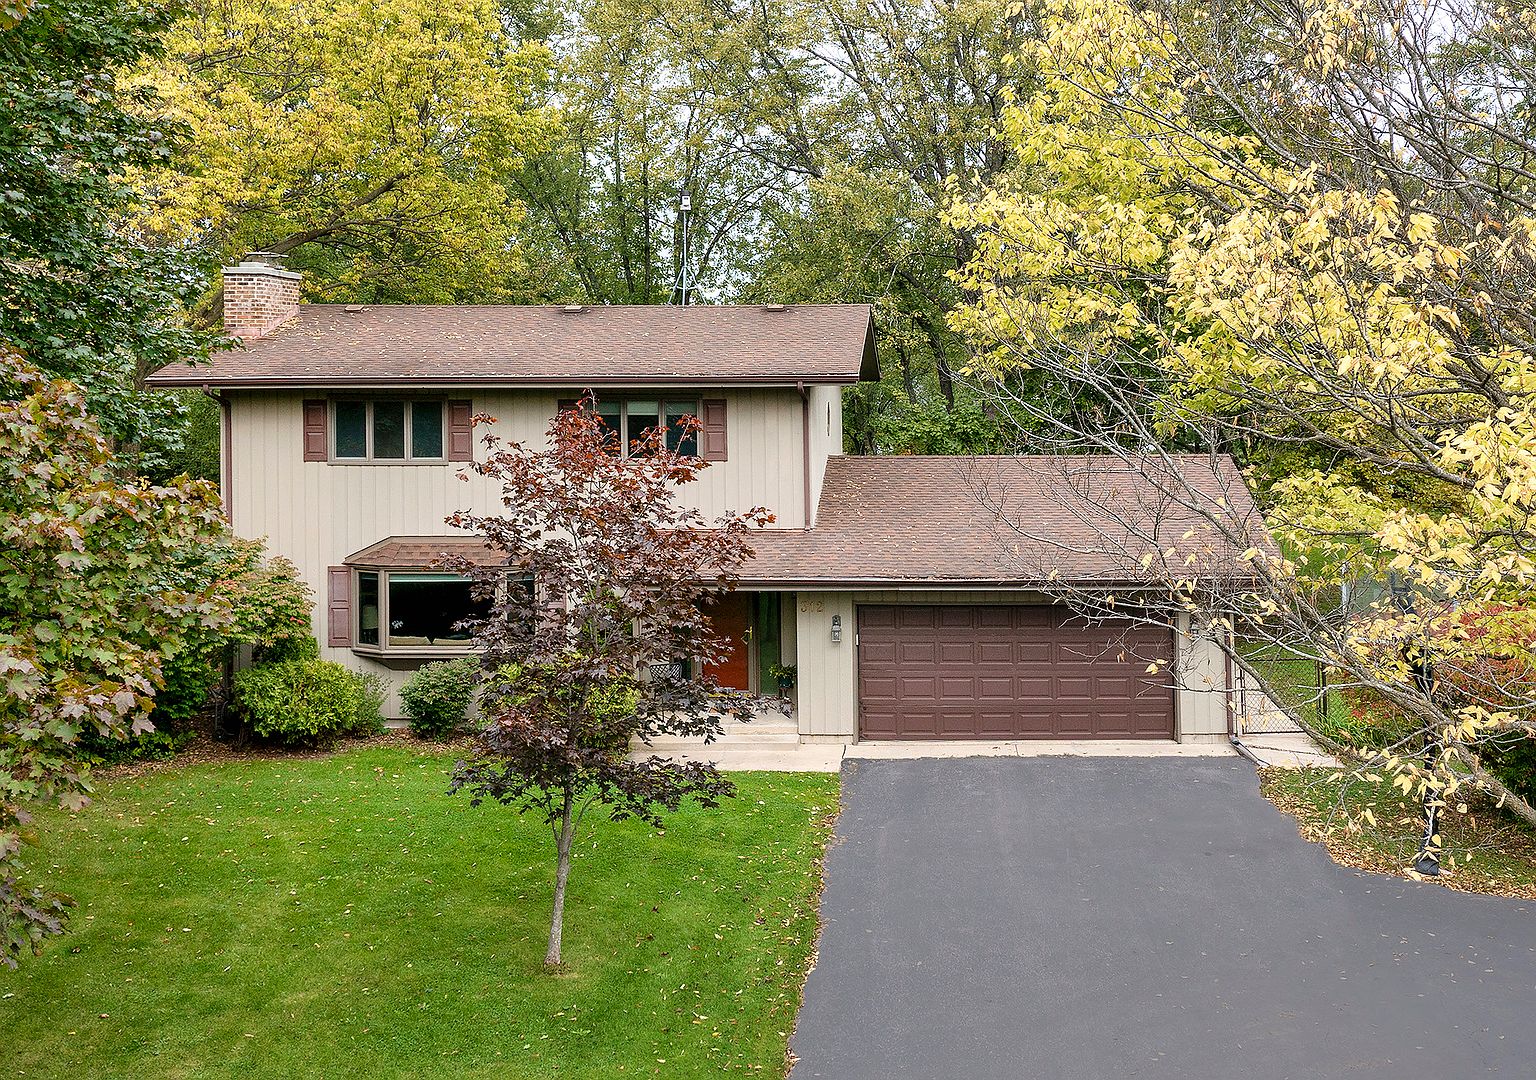 312 Crescent Knoll Dr, Libertyville, IL 60048 | MLS #11351138 | Zillow